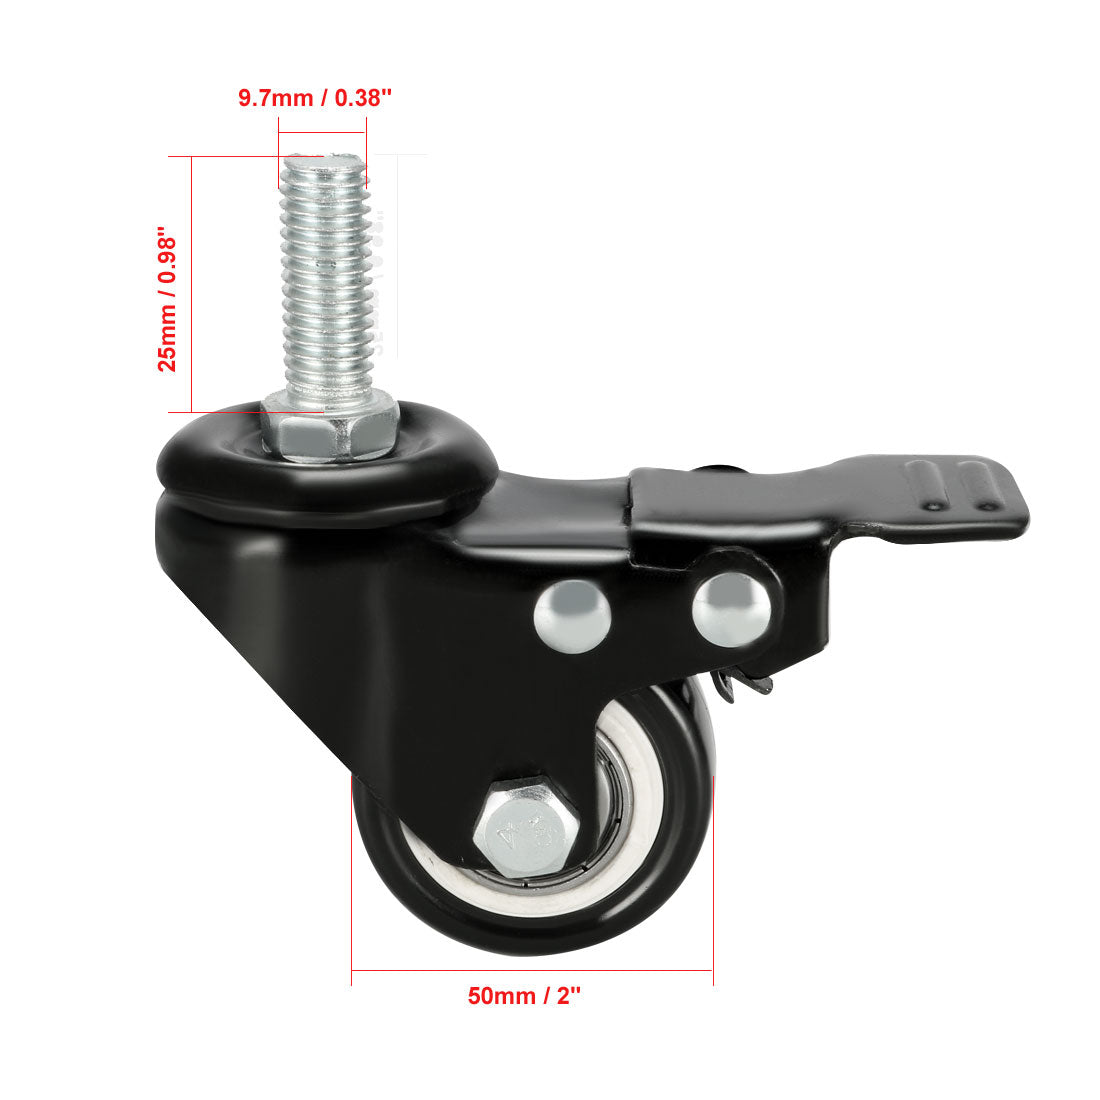 Uxcell Uxcell Swivel Fixed Casters 1.5 Inch PU M10 x 25mm Threaded Stem Caster Wheels, 110lb Capacity Each, 4 Pcs (2 Pcs Swivel, 2 Pcs Fixed with Brake)